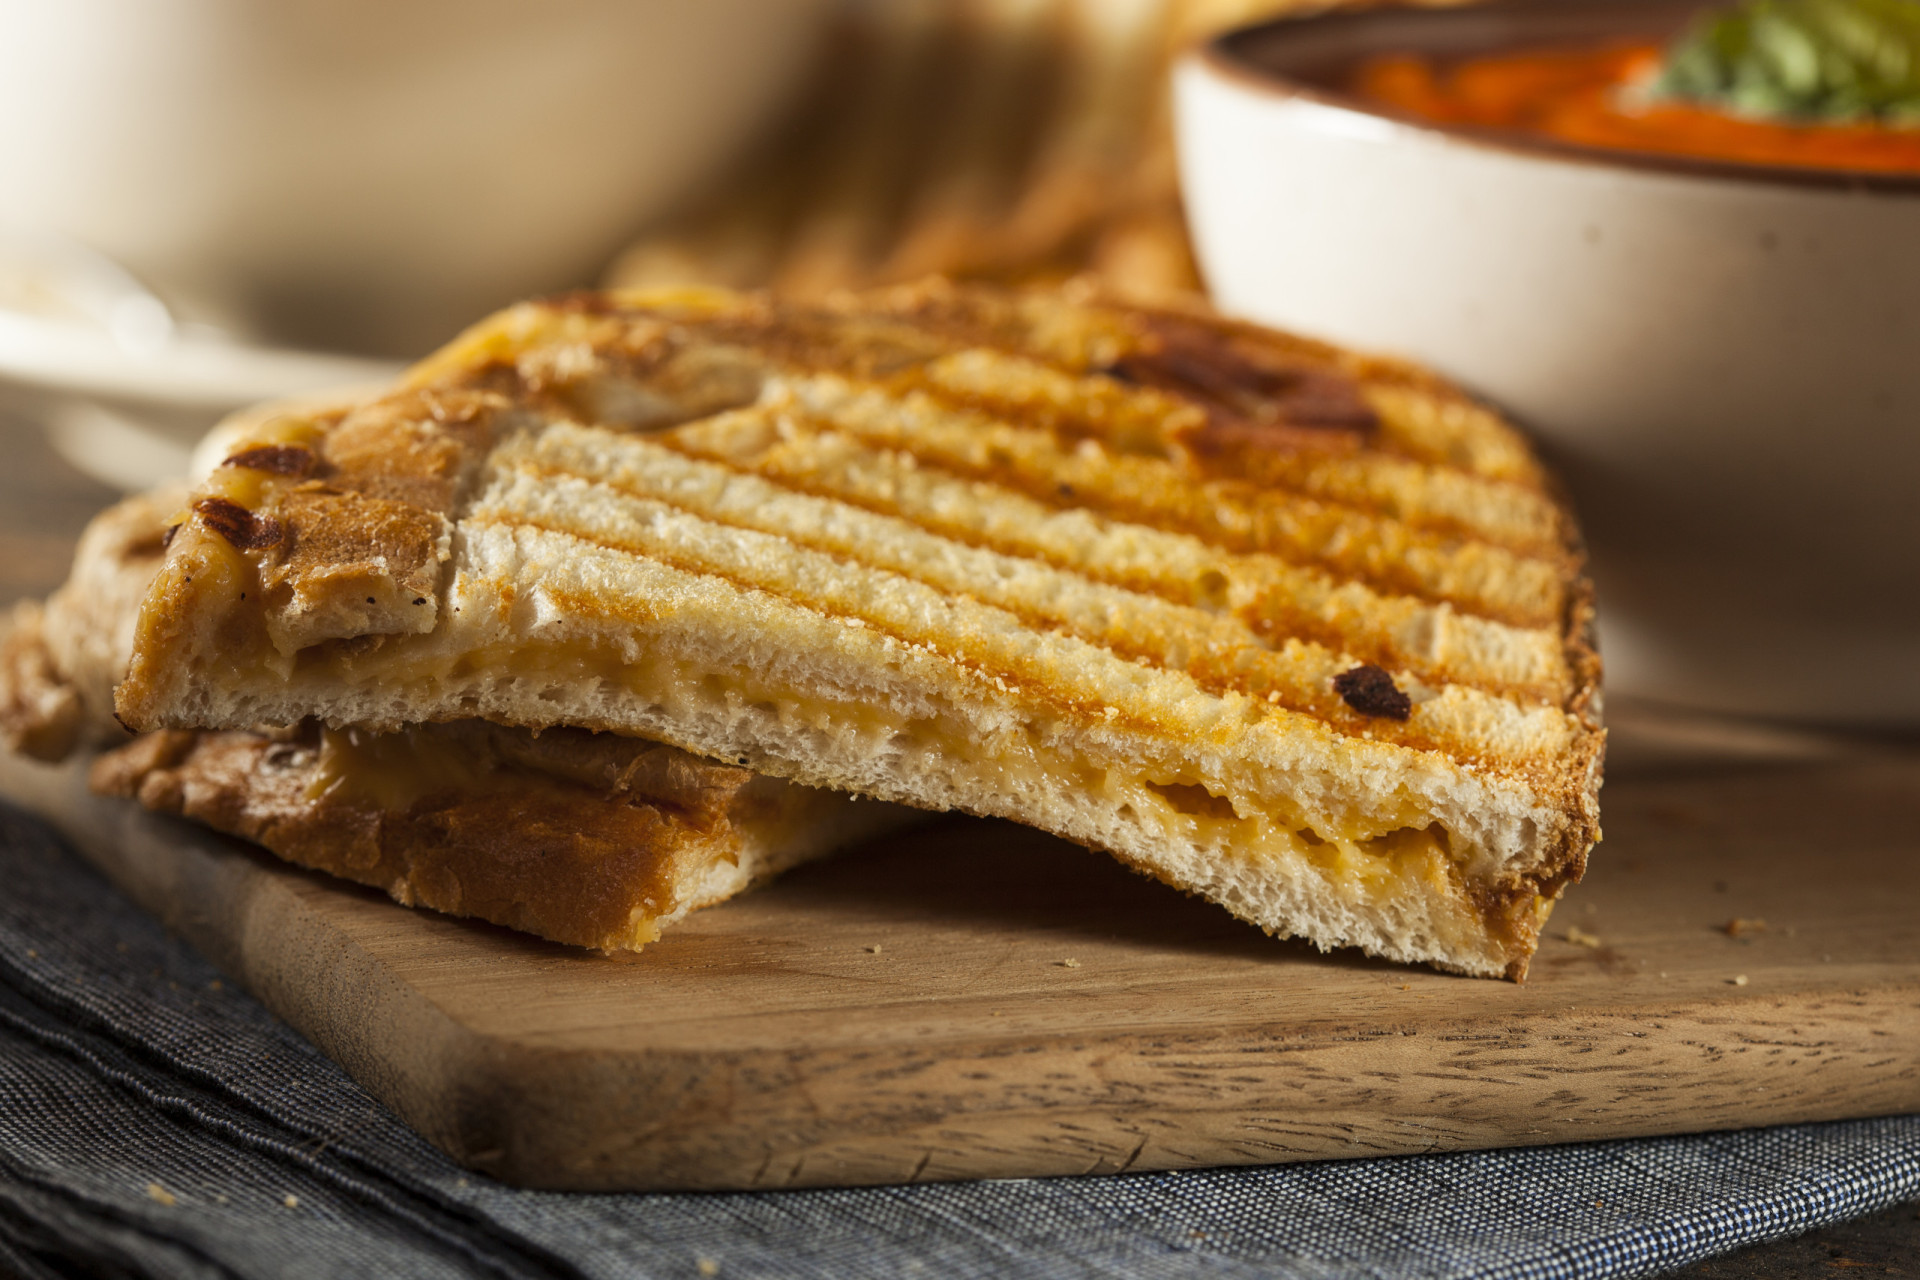 The best grilled cheese hacks to go from good to gourmet